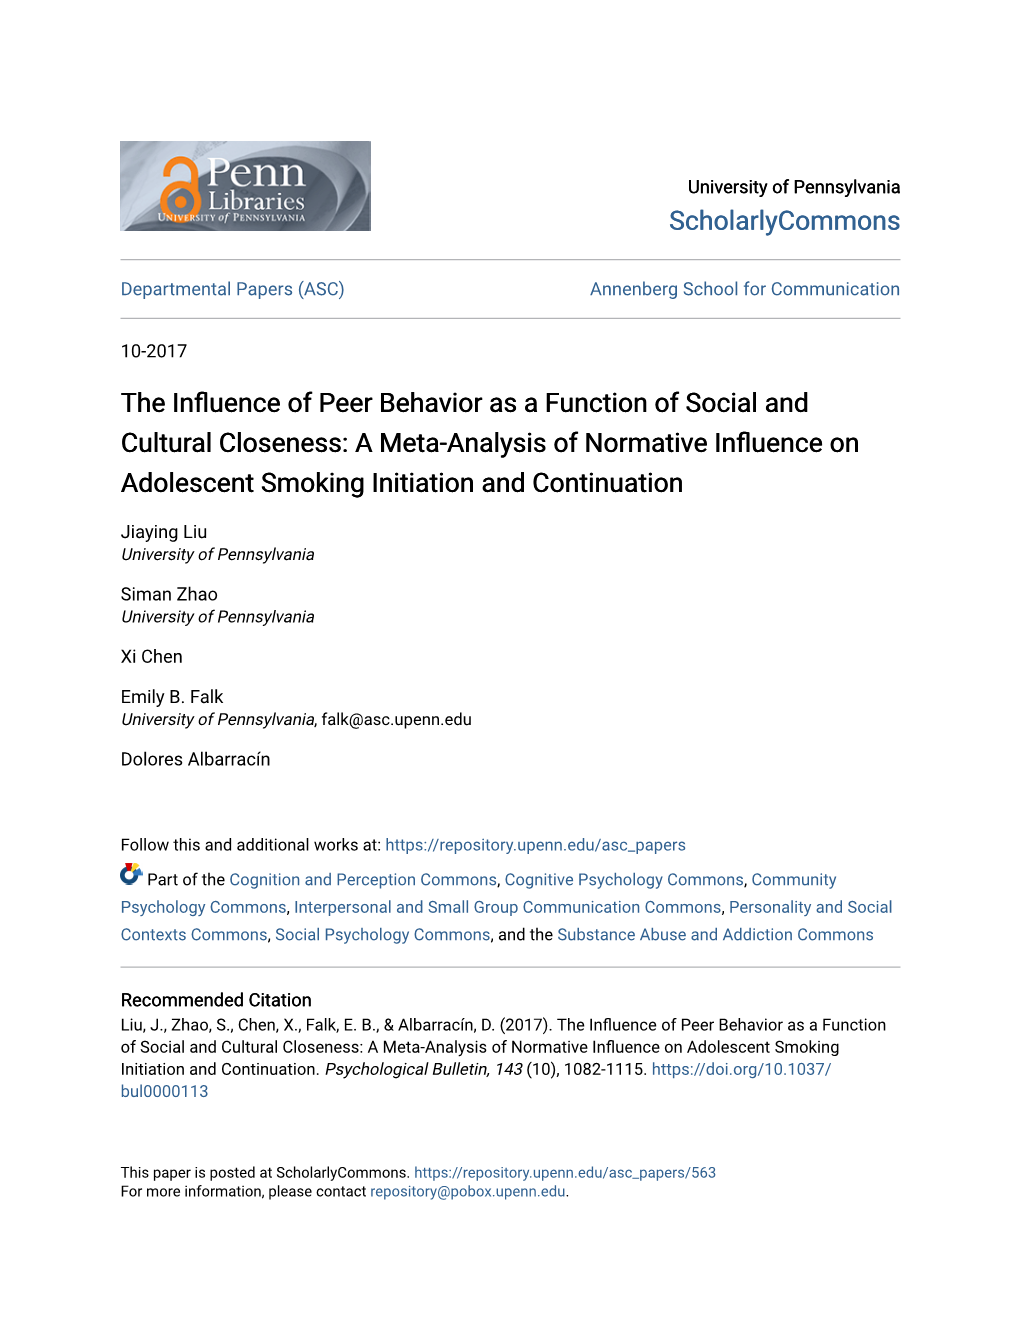 The Influence of Peer Behavior As a Function of Social and Cultural Closeness: a Meta